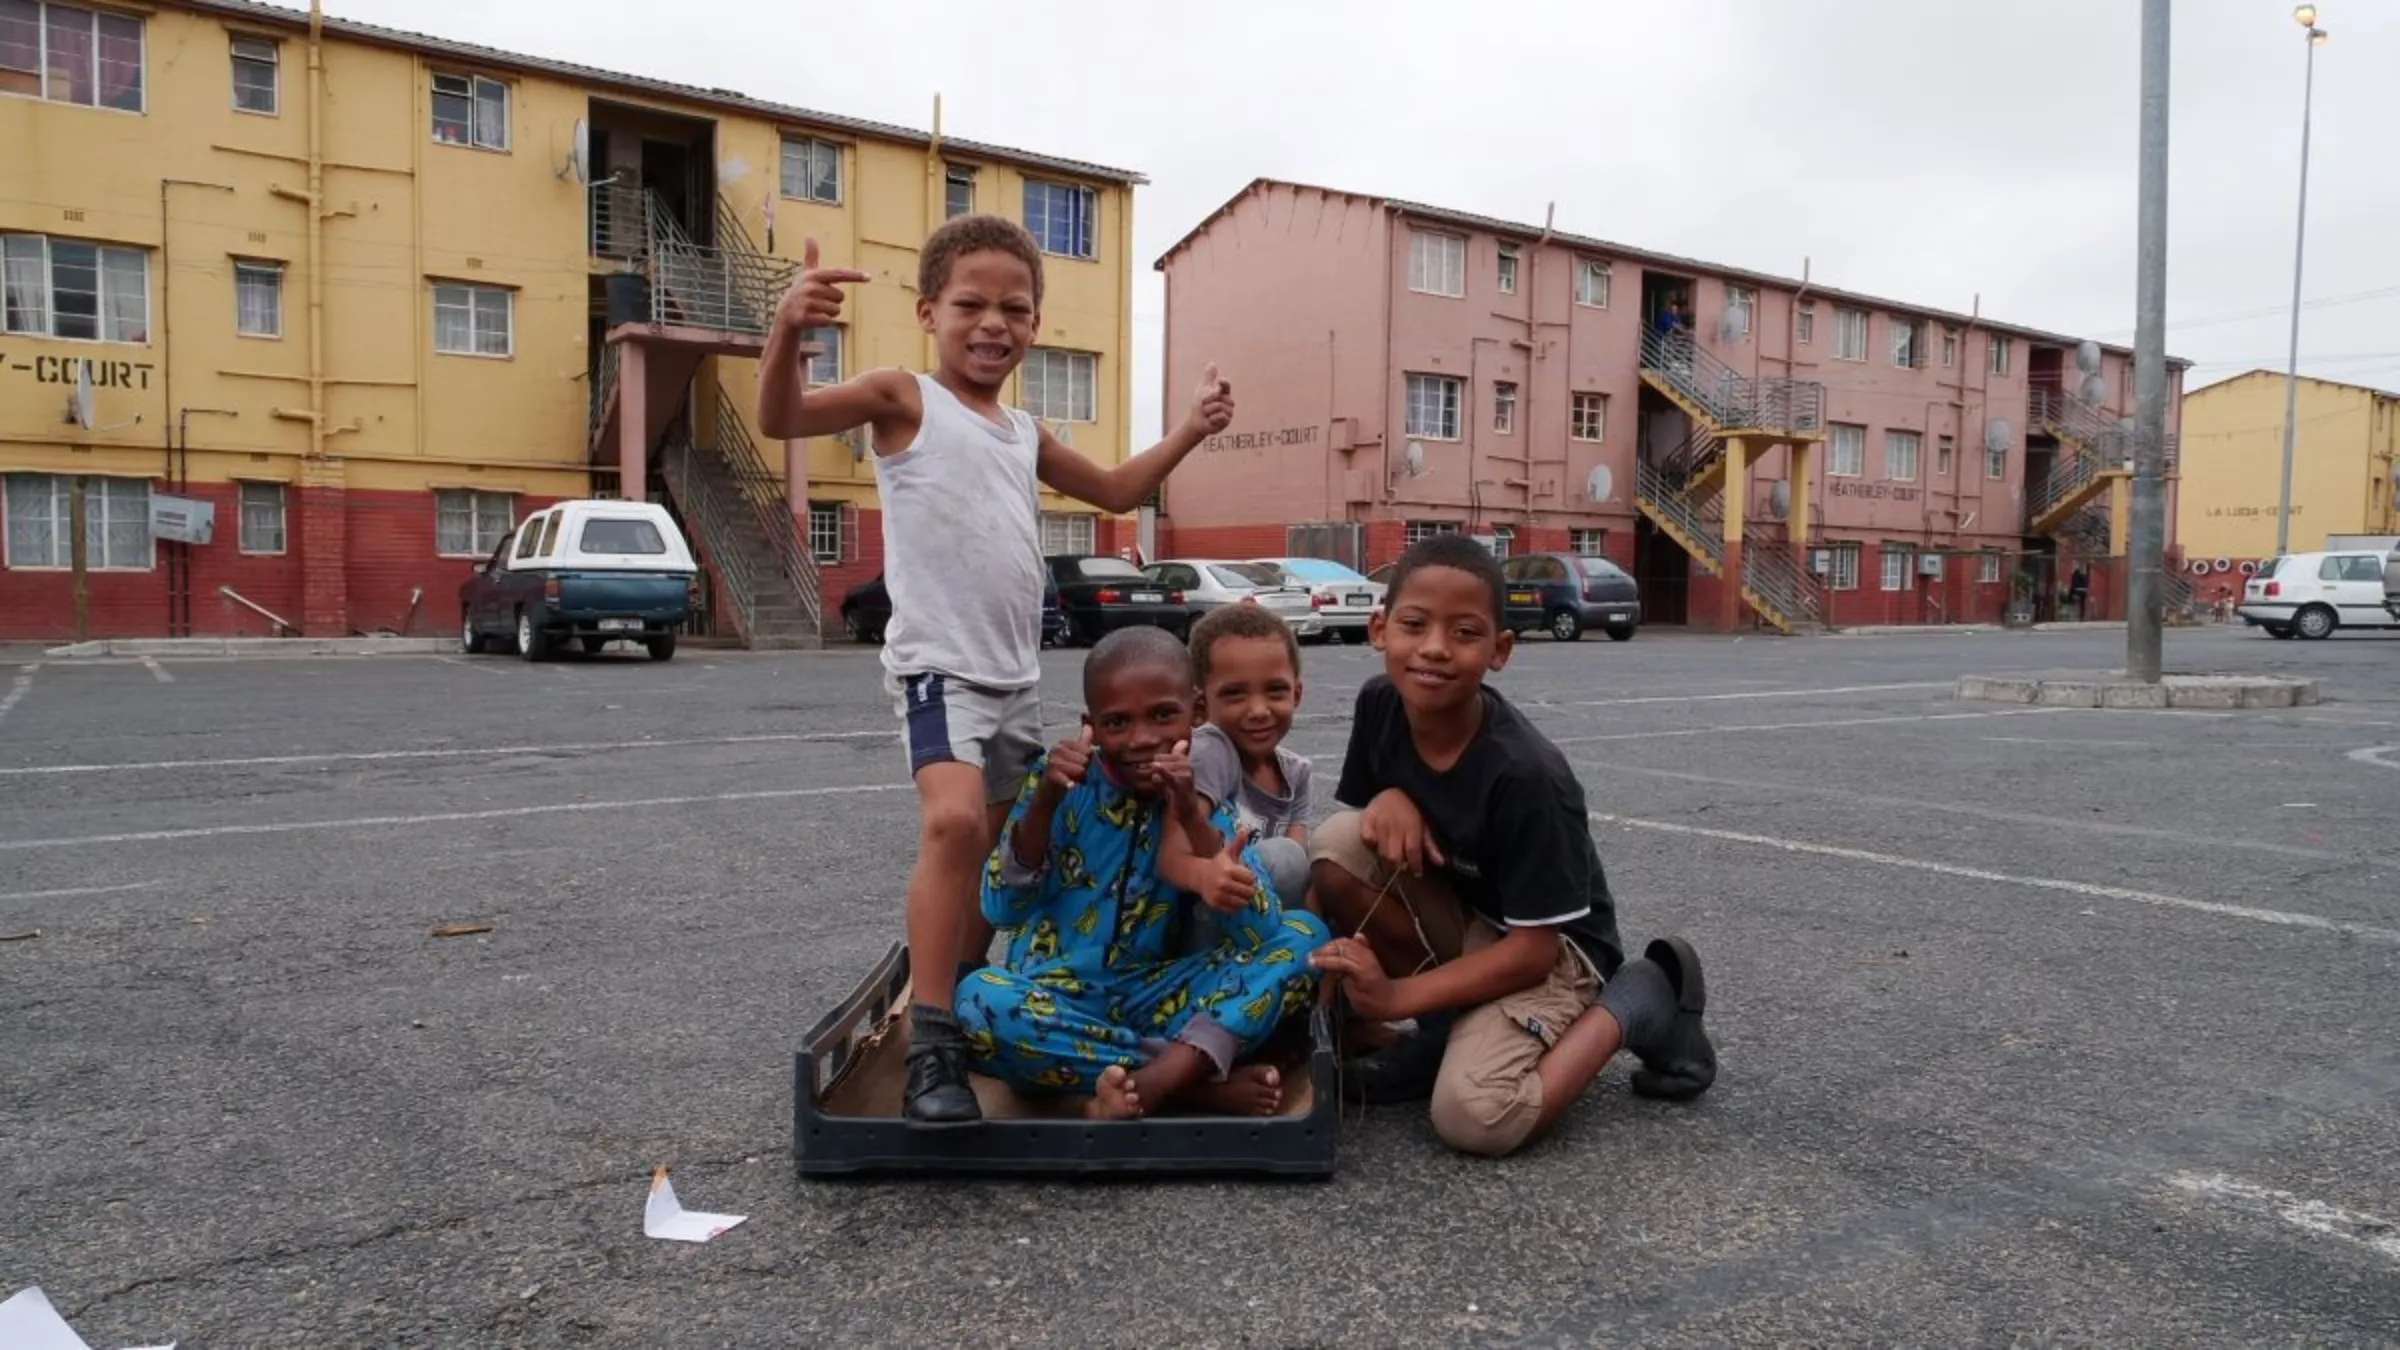 Four young children pose for a photo as they sit on a plastic crate in the parking lot of apartment blocks in the Scottsdene neighbourhood in Cape Town, South Africa, March 9, 2023. Thomson Reuters Foundation/Kim Harrisberg